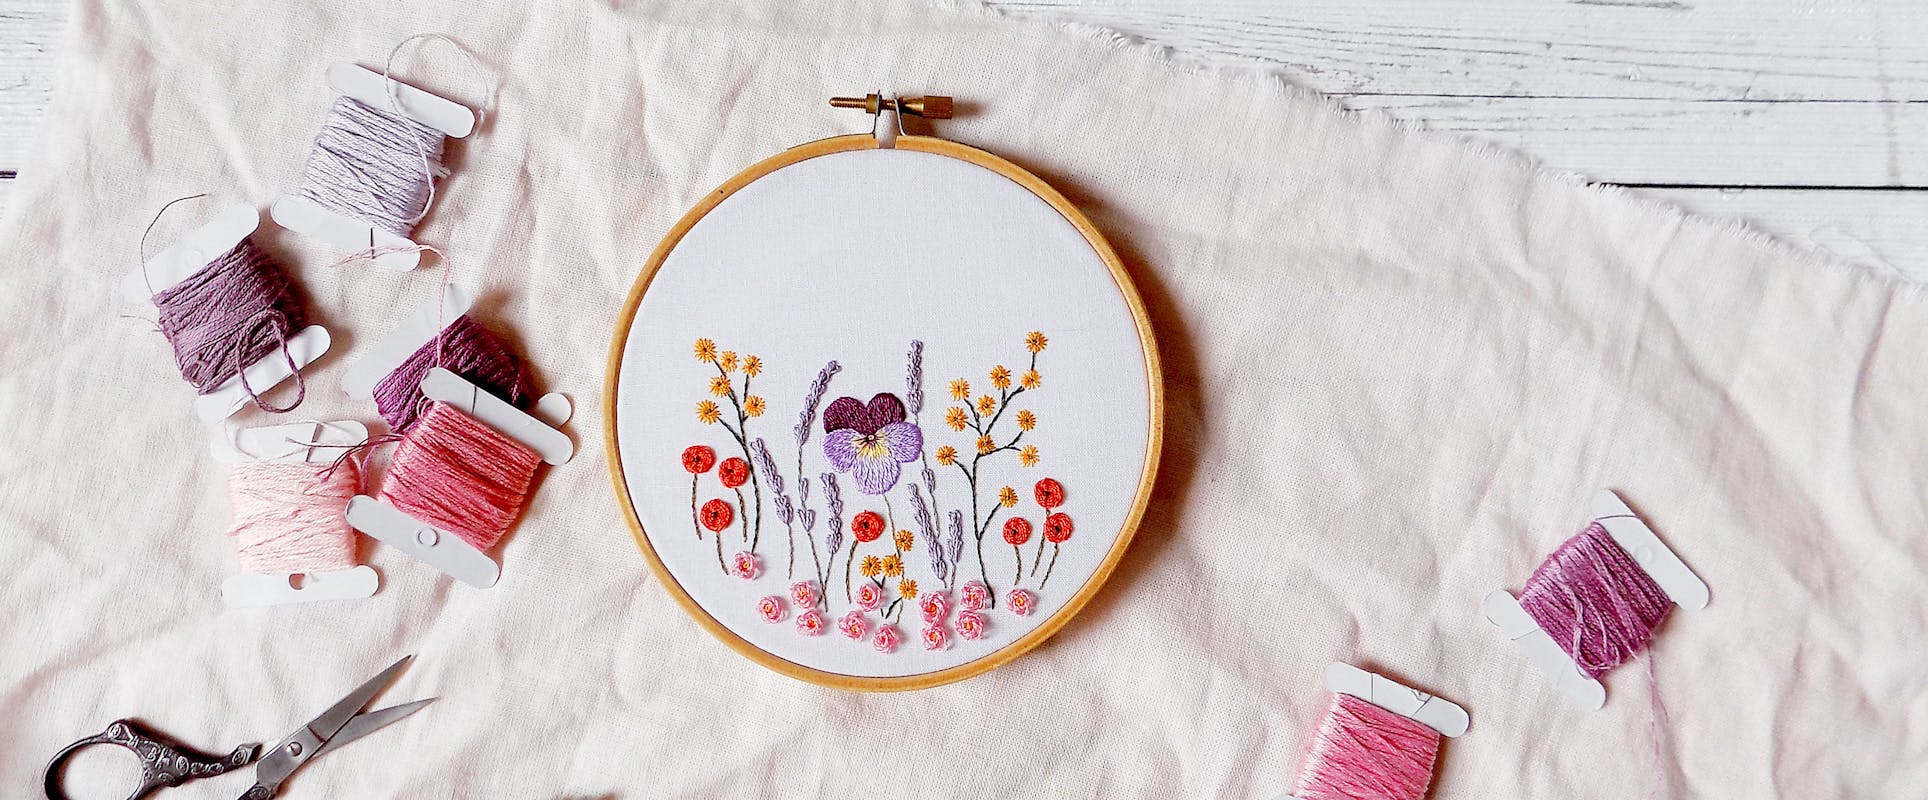 May Floral Embroidery Pattern // Lily Embroidery Pattern // DIY Embroidery  // Digital Embroidery Pattern // Birth Flower Embroidery 